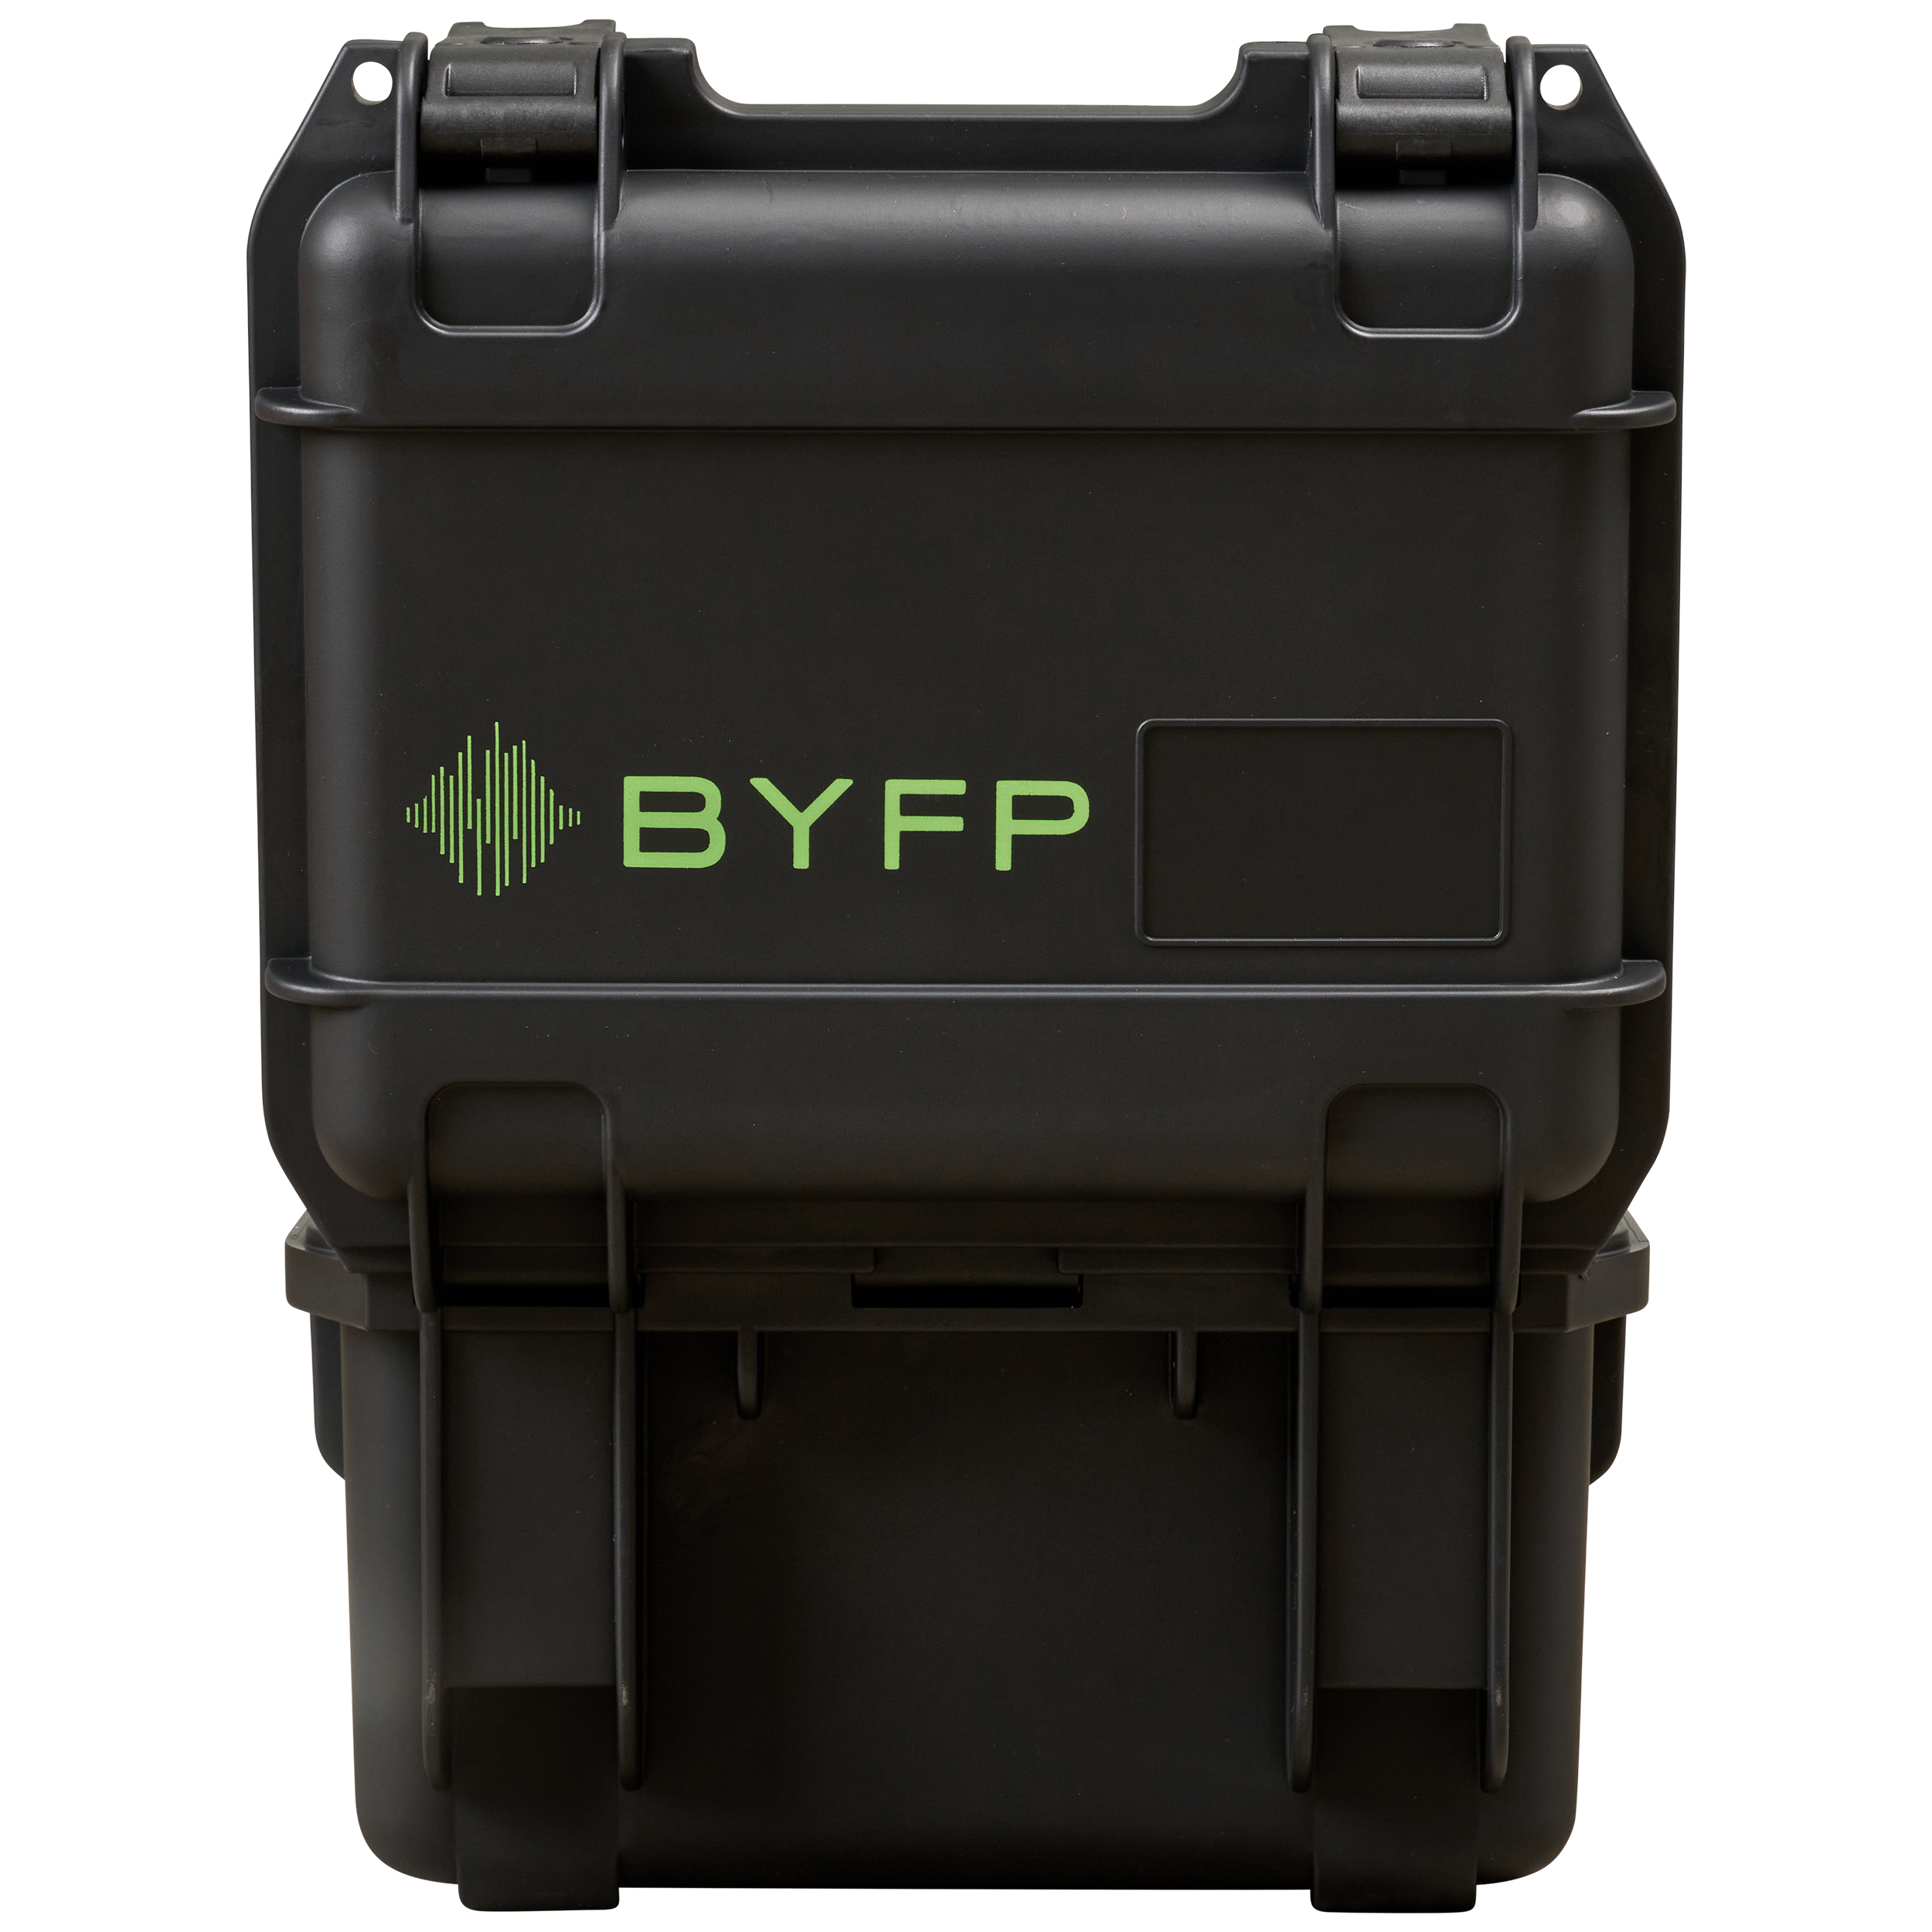 BYFP ipCase for 2x Shure Beta 181 Side-Address Condenser Microphones